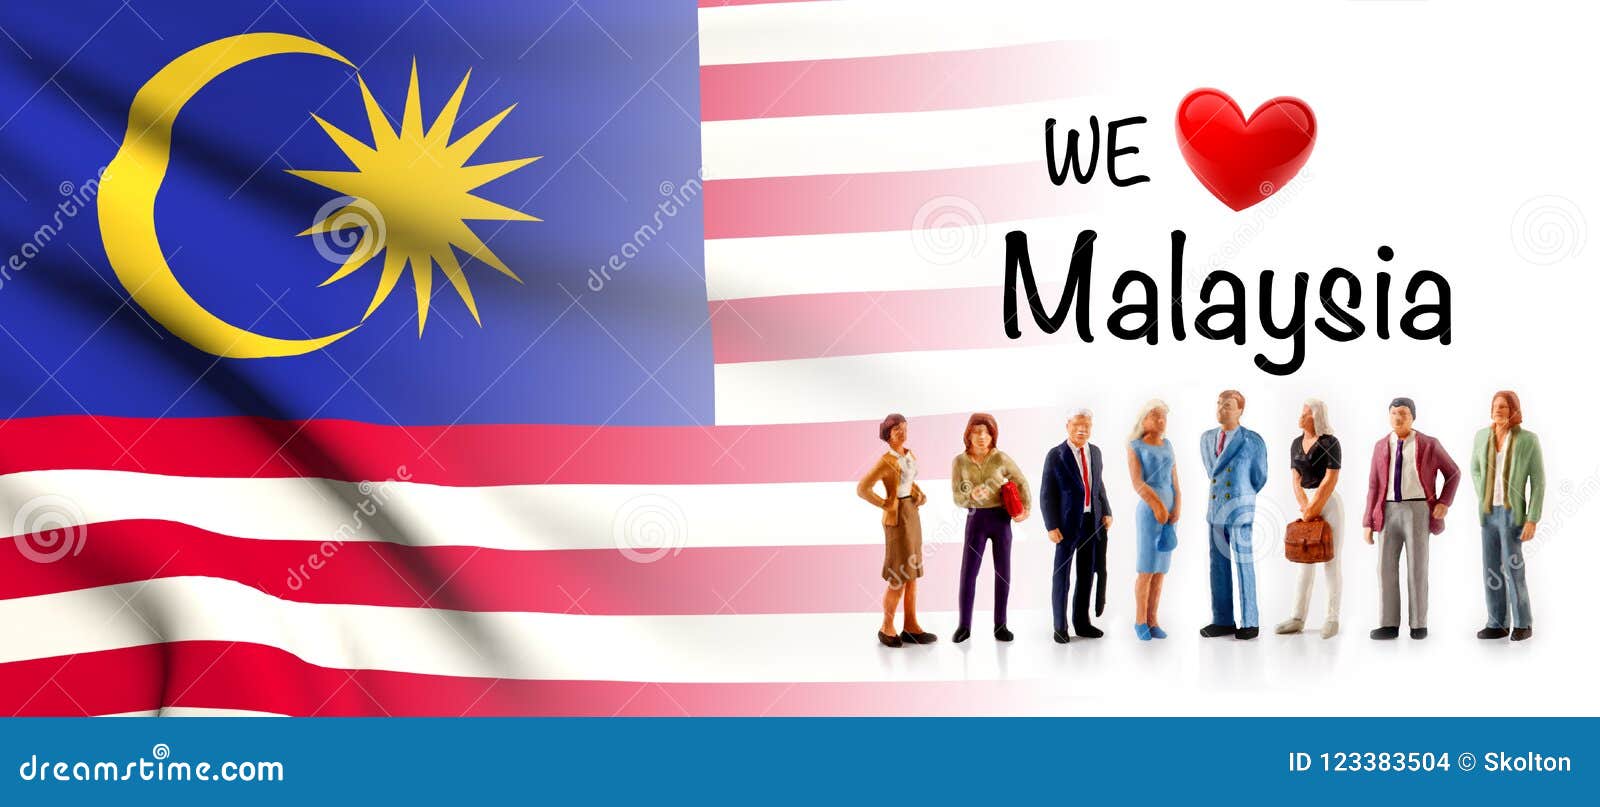 We Love Malaysia, a Group of People Pose Next To the Malaysian Flag